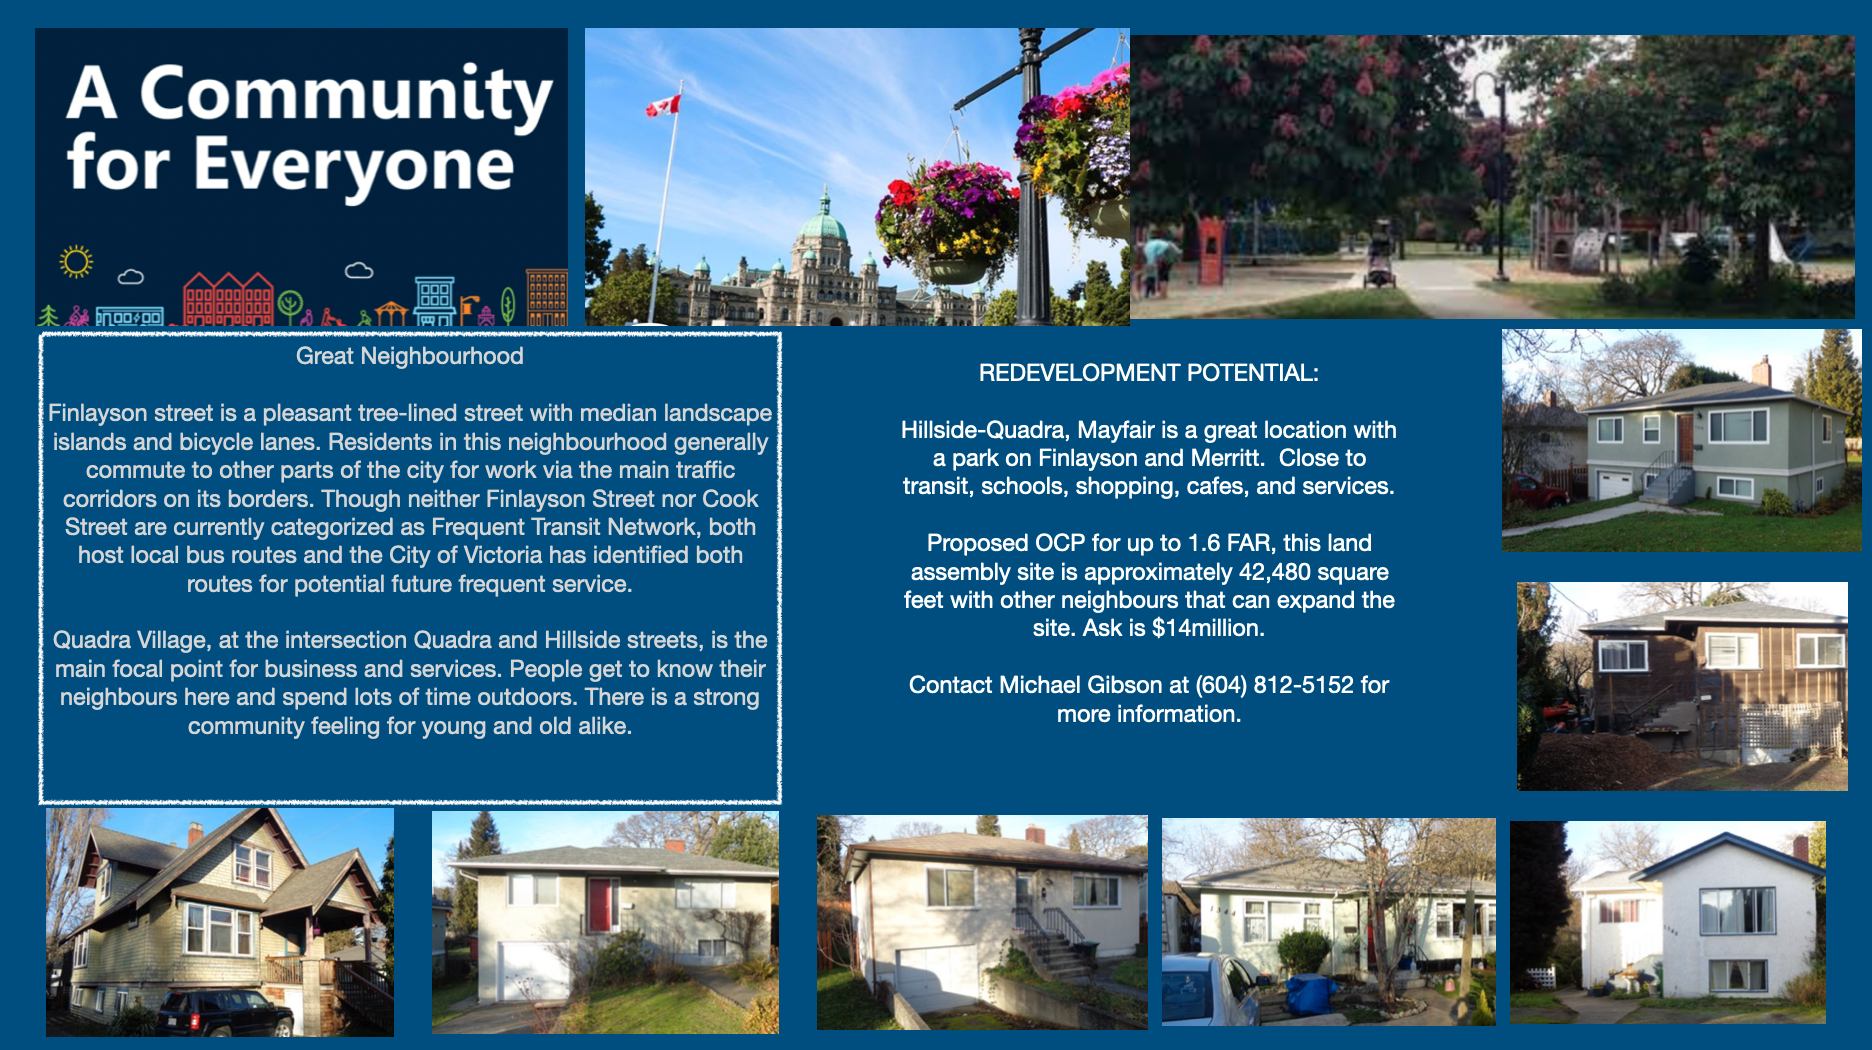 Main Photo: 1340 Finlayson Street in victoria: Victoria VE Land for sale (Out of Town)  : MLS®#  905087